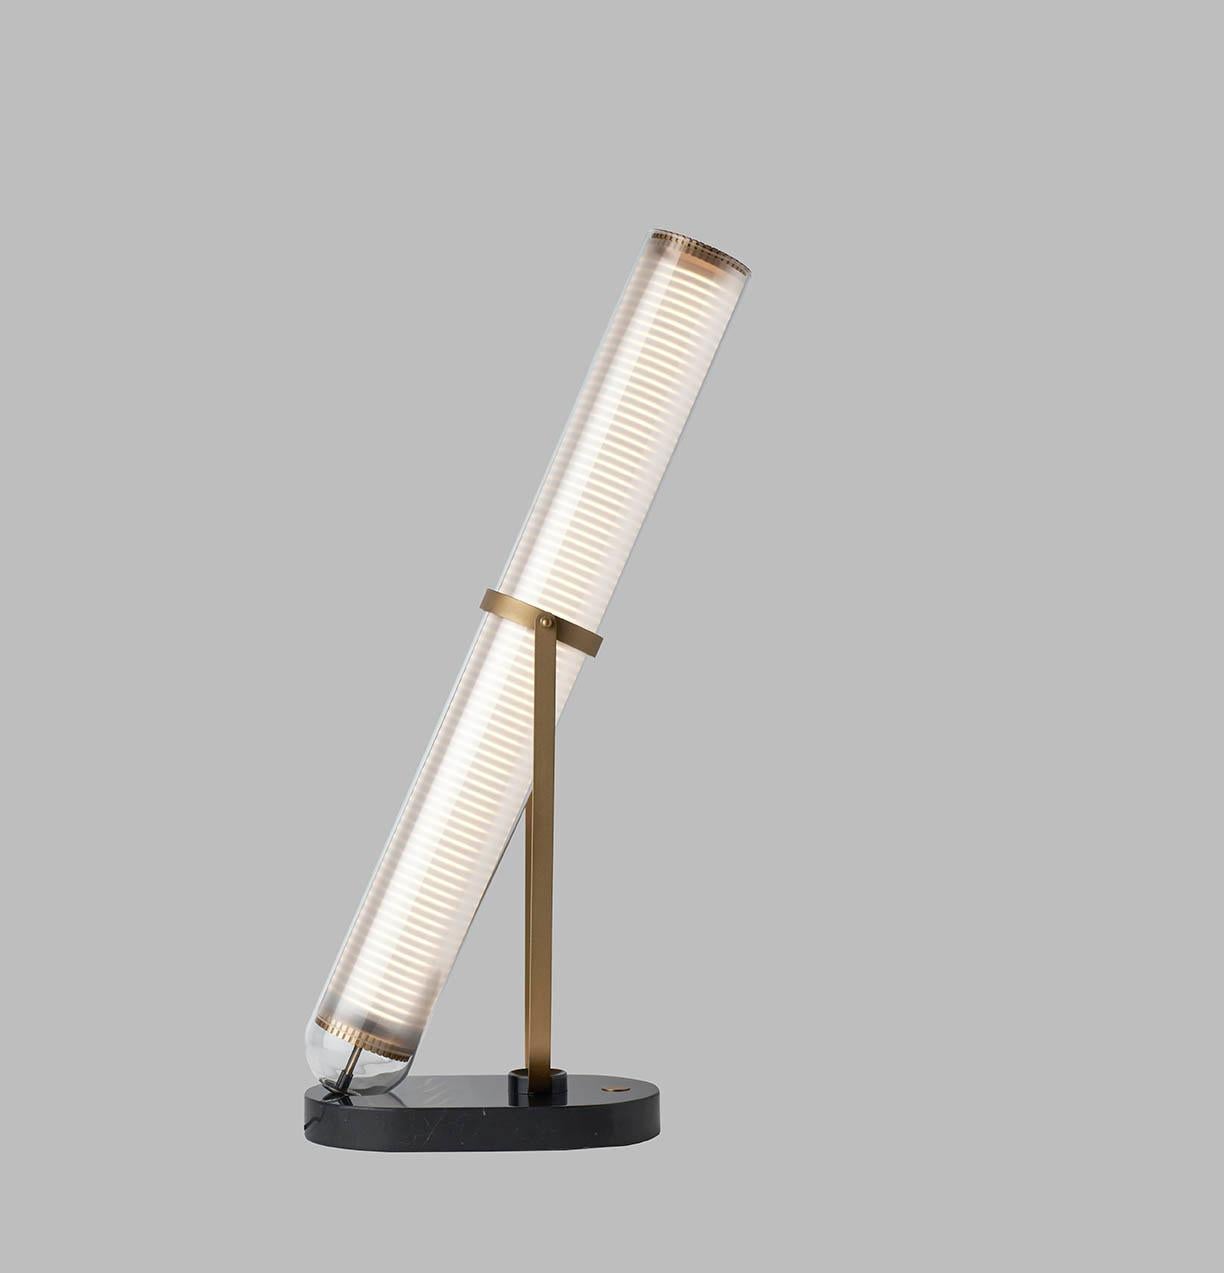 Other La Lampe Frechin Table Lamp by Jean-Louis Frechin For Sale